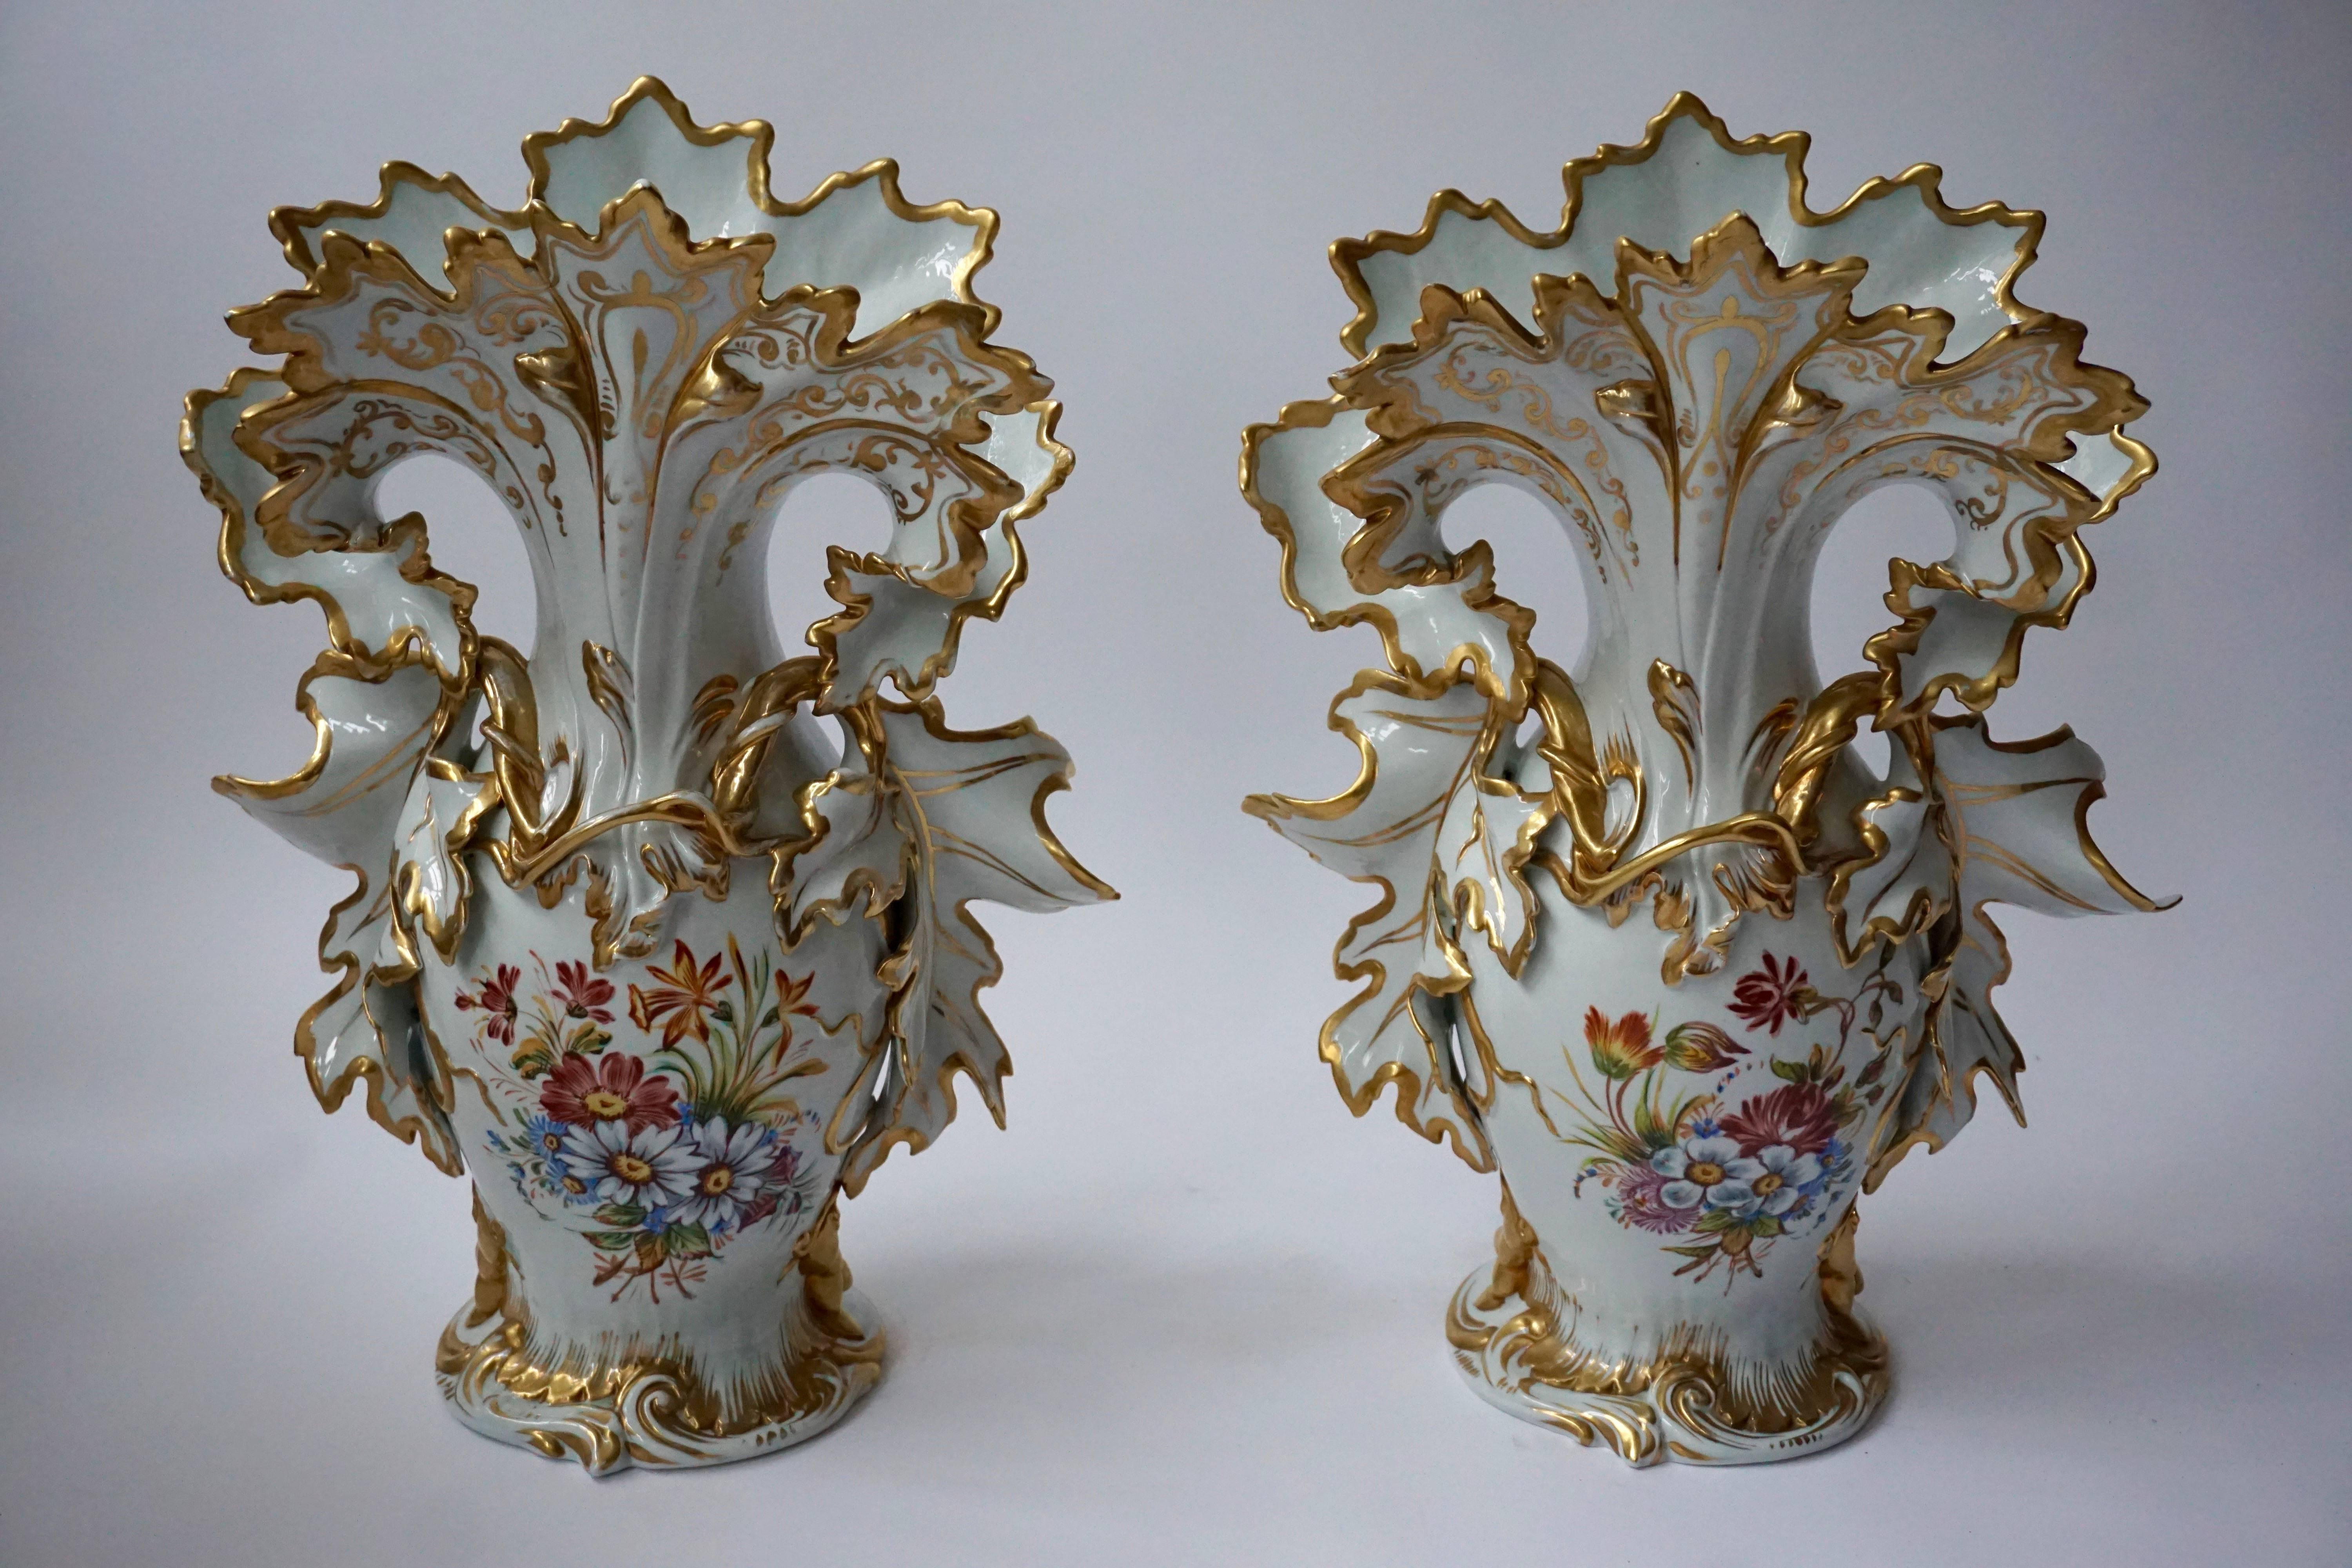 Great pair of Italian porcelain vases with gold leaf and flower decoration.
Measures: Height 46 cm.
Width 33 cm.
Depth 20 cm.